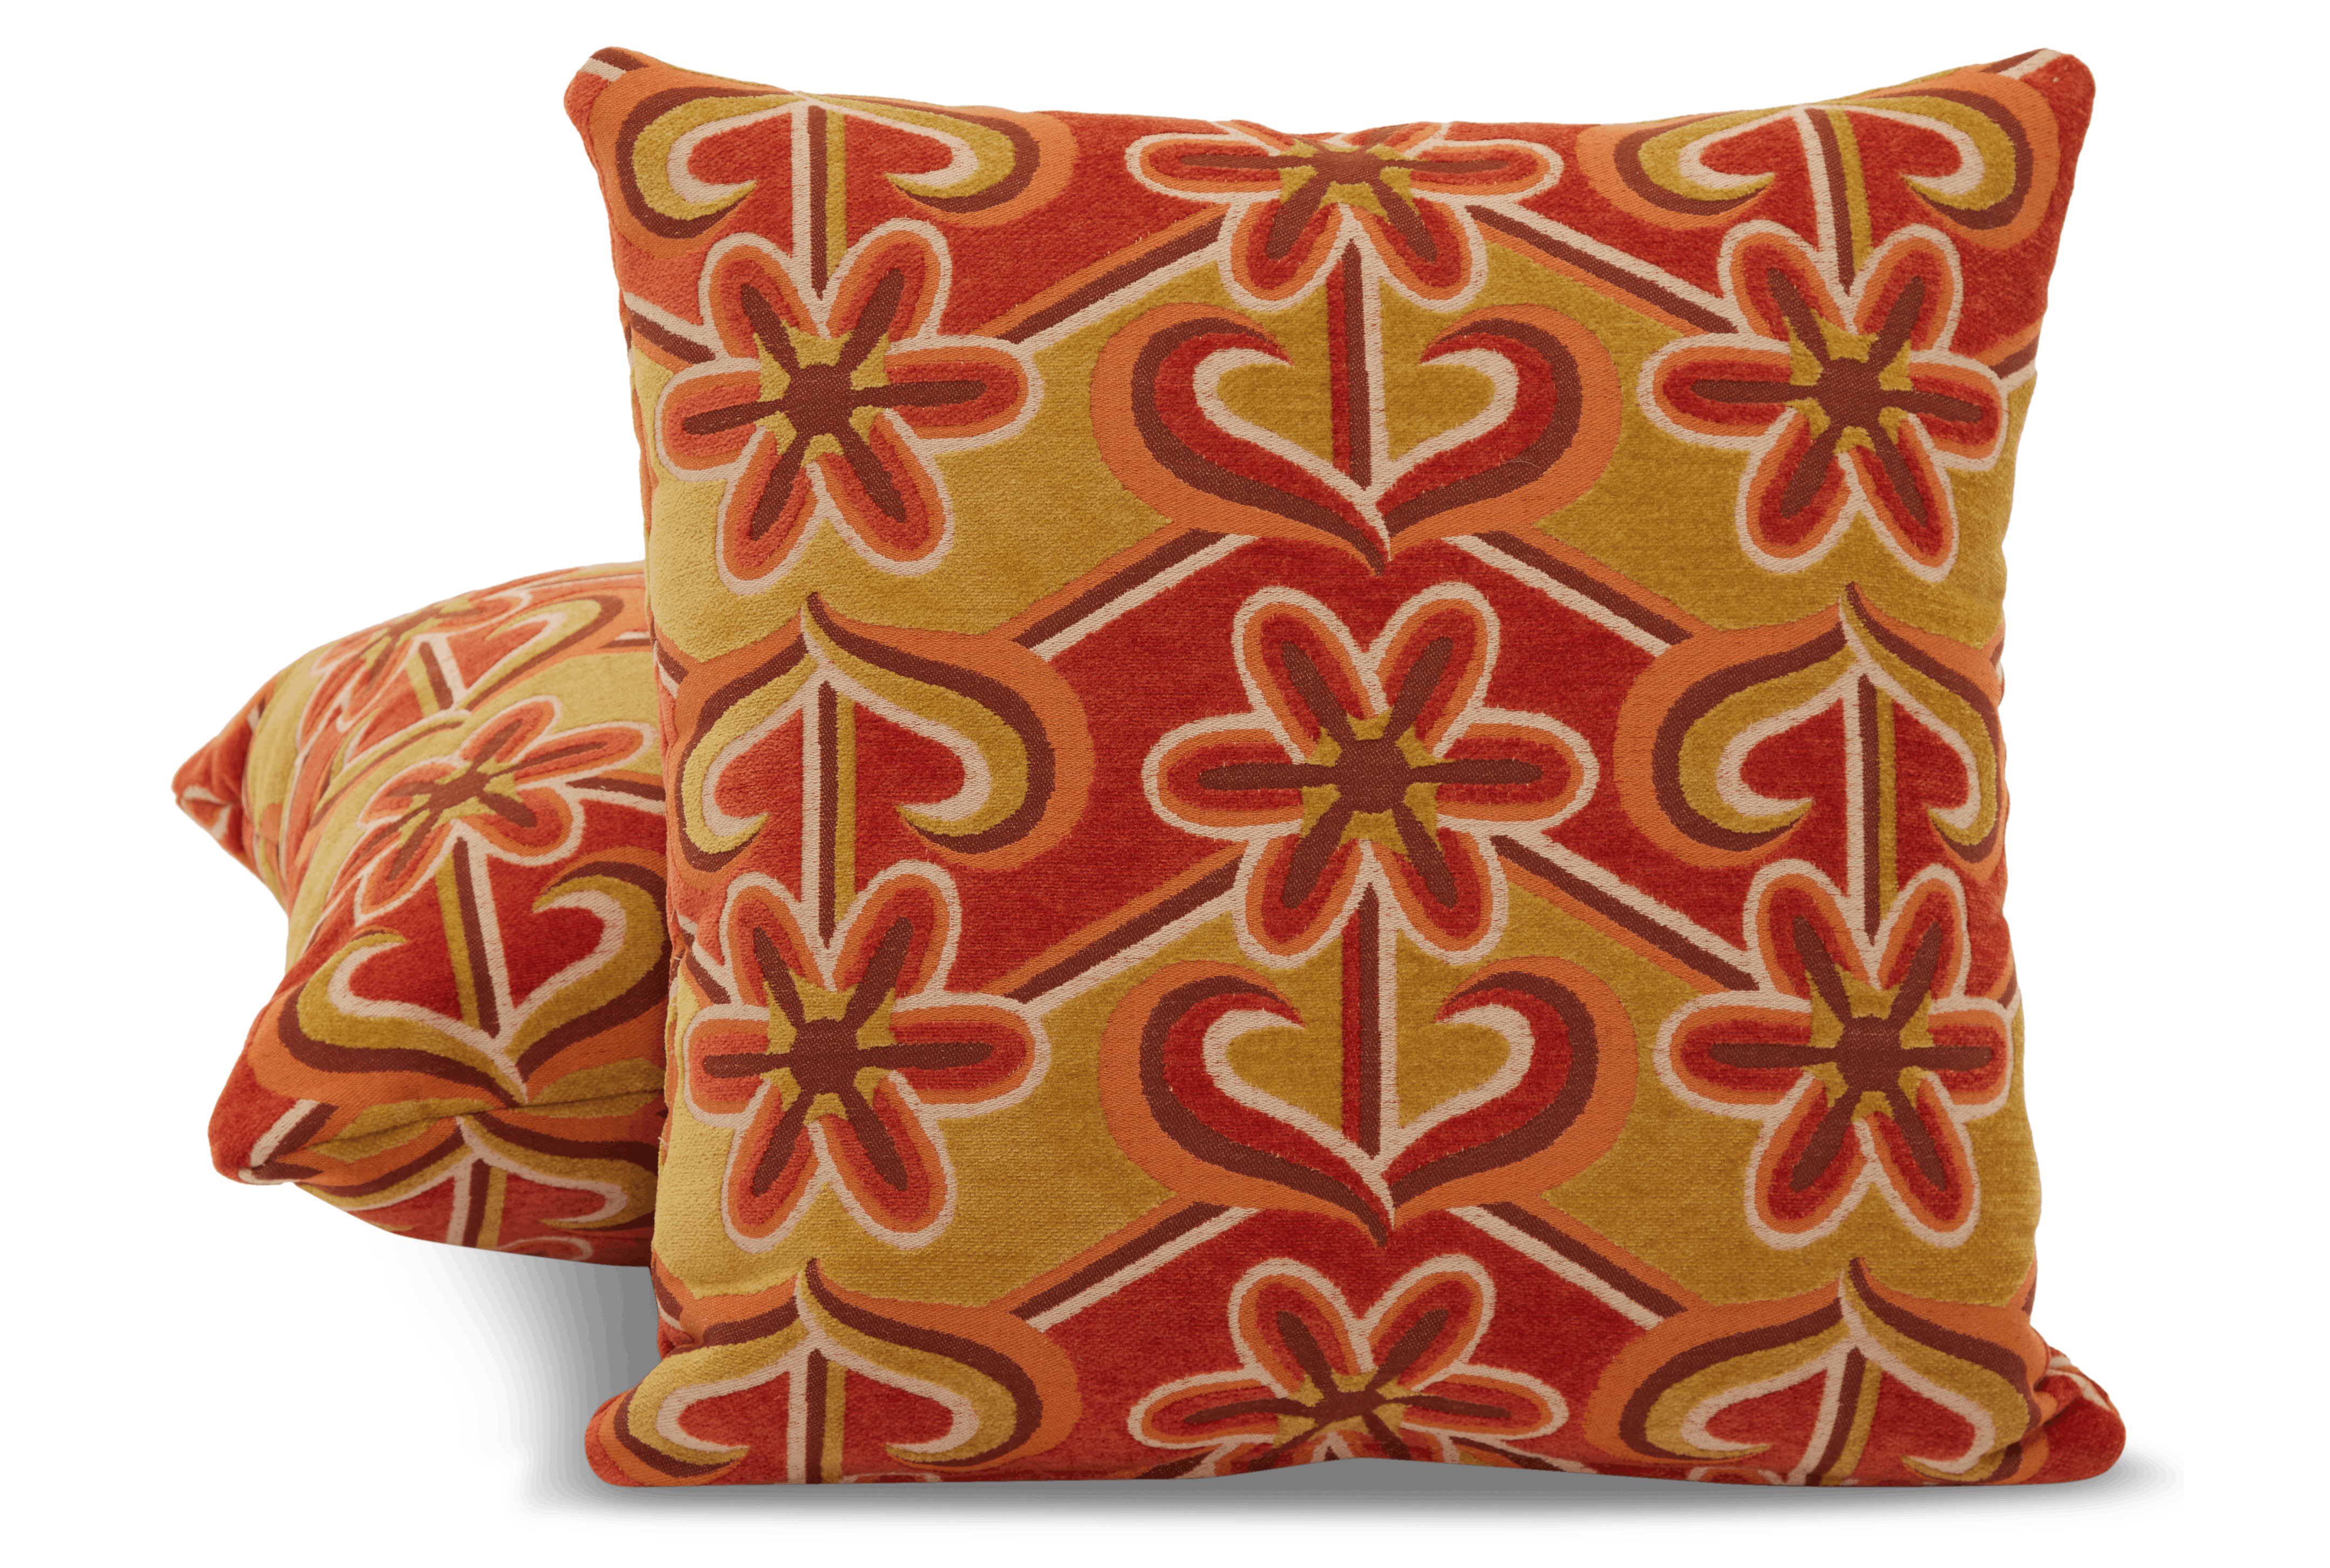 sunny chevy decorative knife edge pillows %28set 2%29 (limited edition) sunny chevy